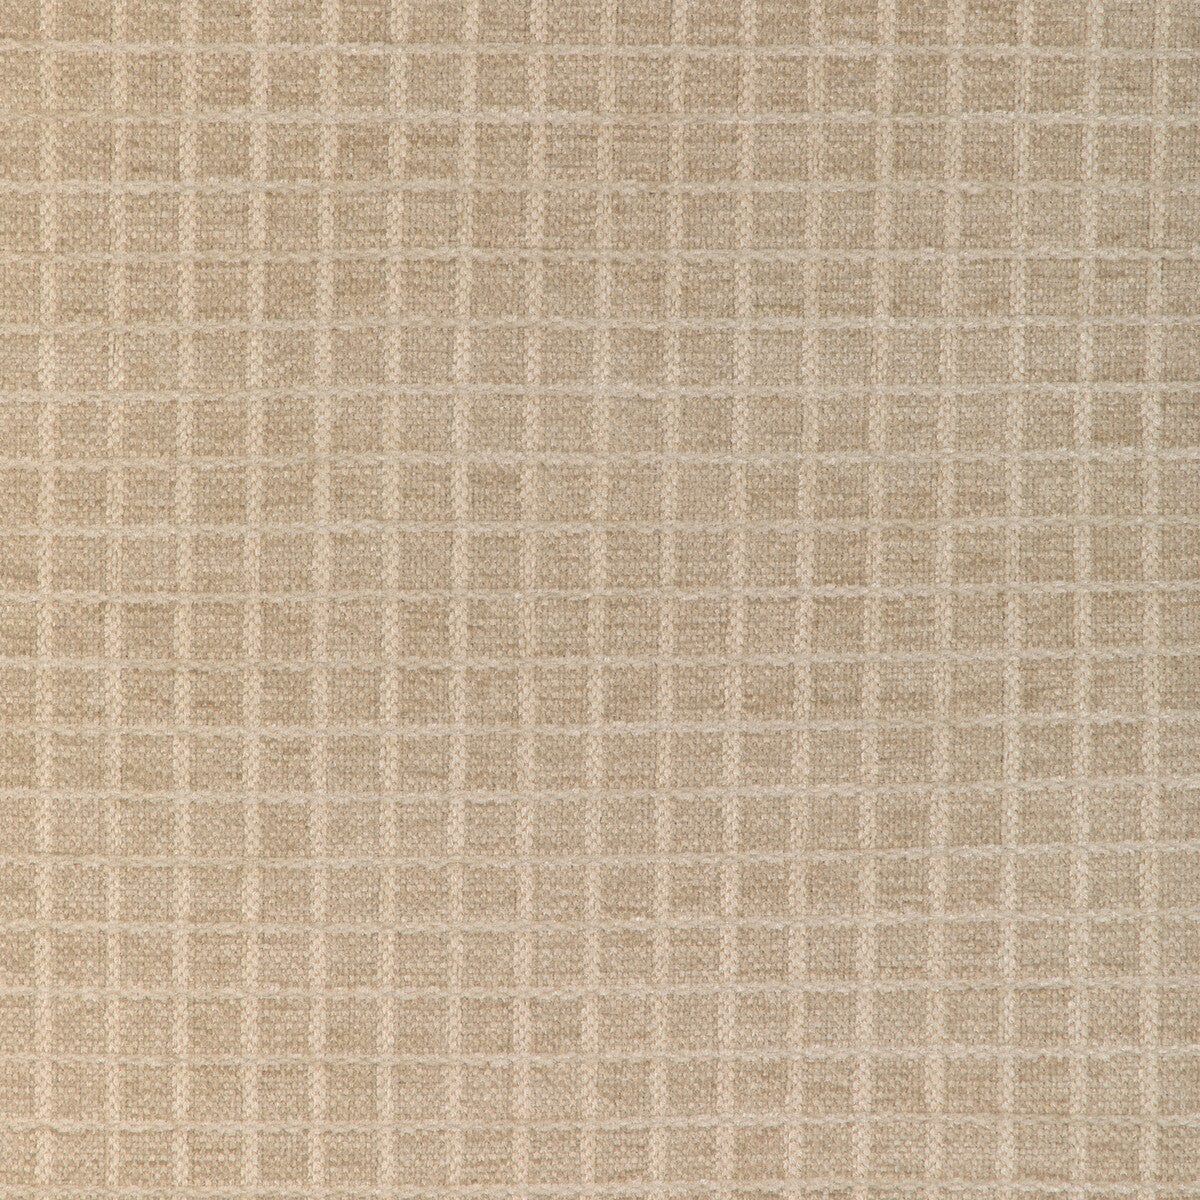 Chiron Texture fabric in cream color - pattern 8023155.106.0 - by Brunschwig &amp; Fils in the Chambery Textures IV collection